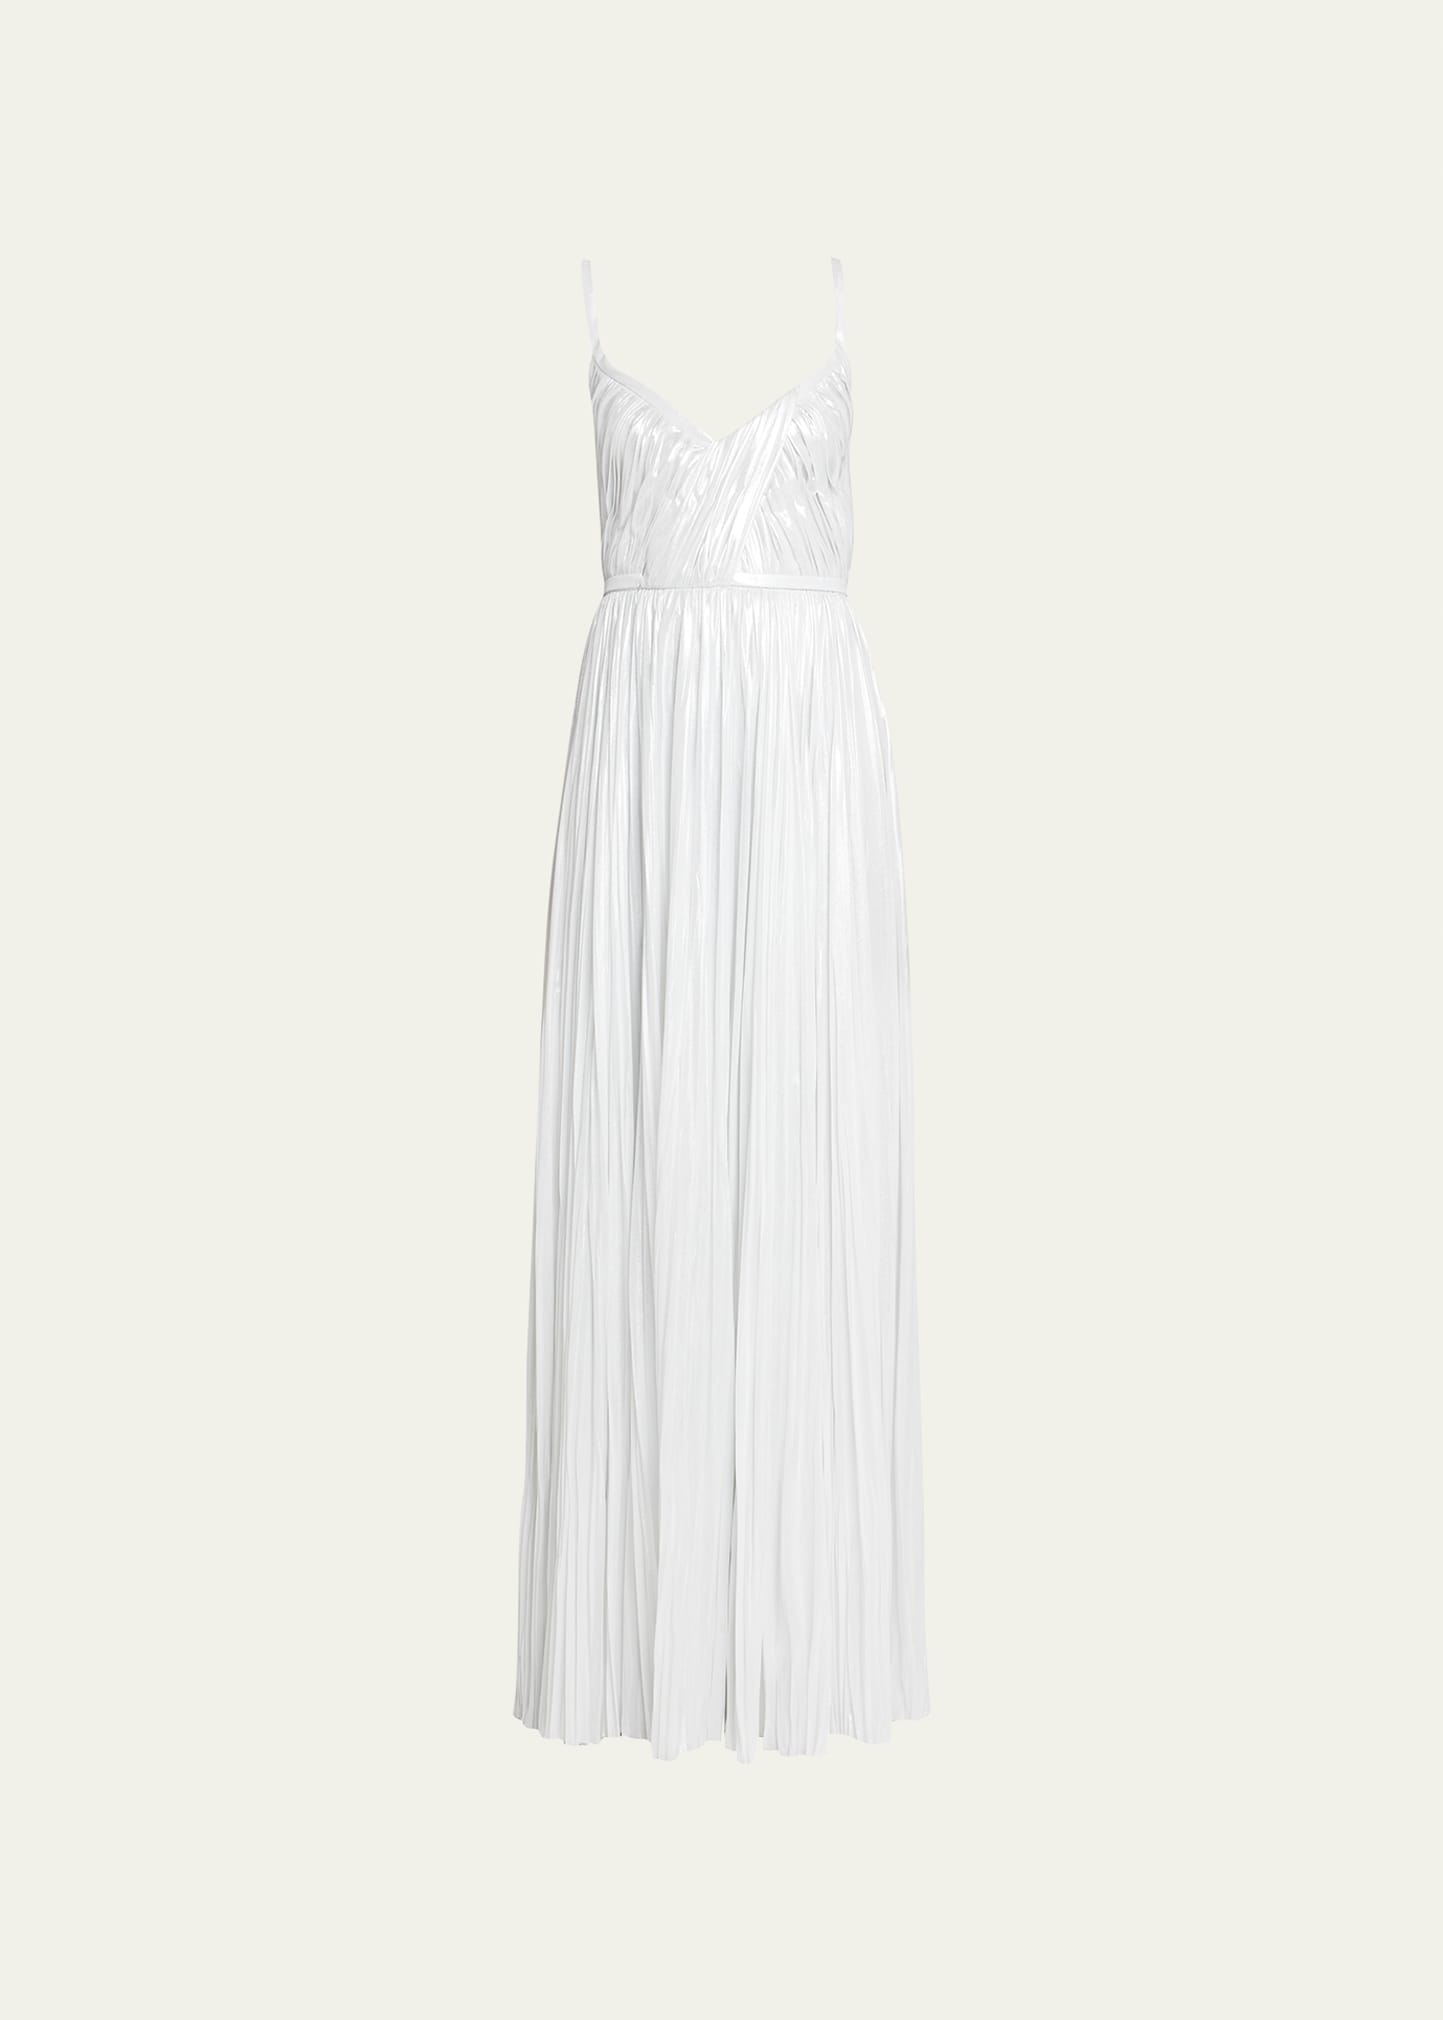 J. Mendel Hand Pleated Gown